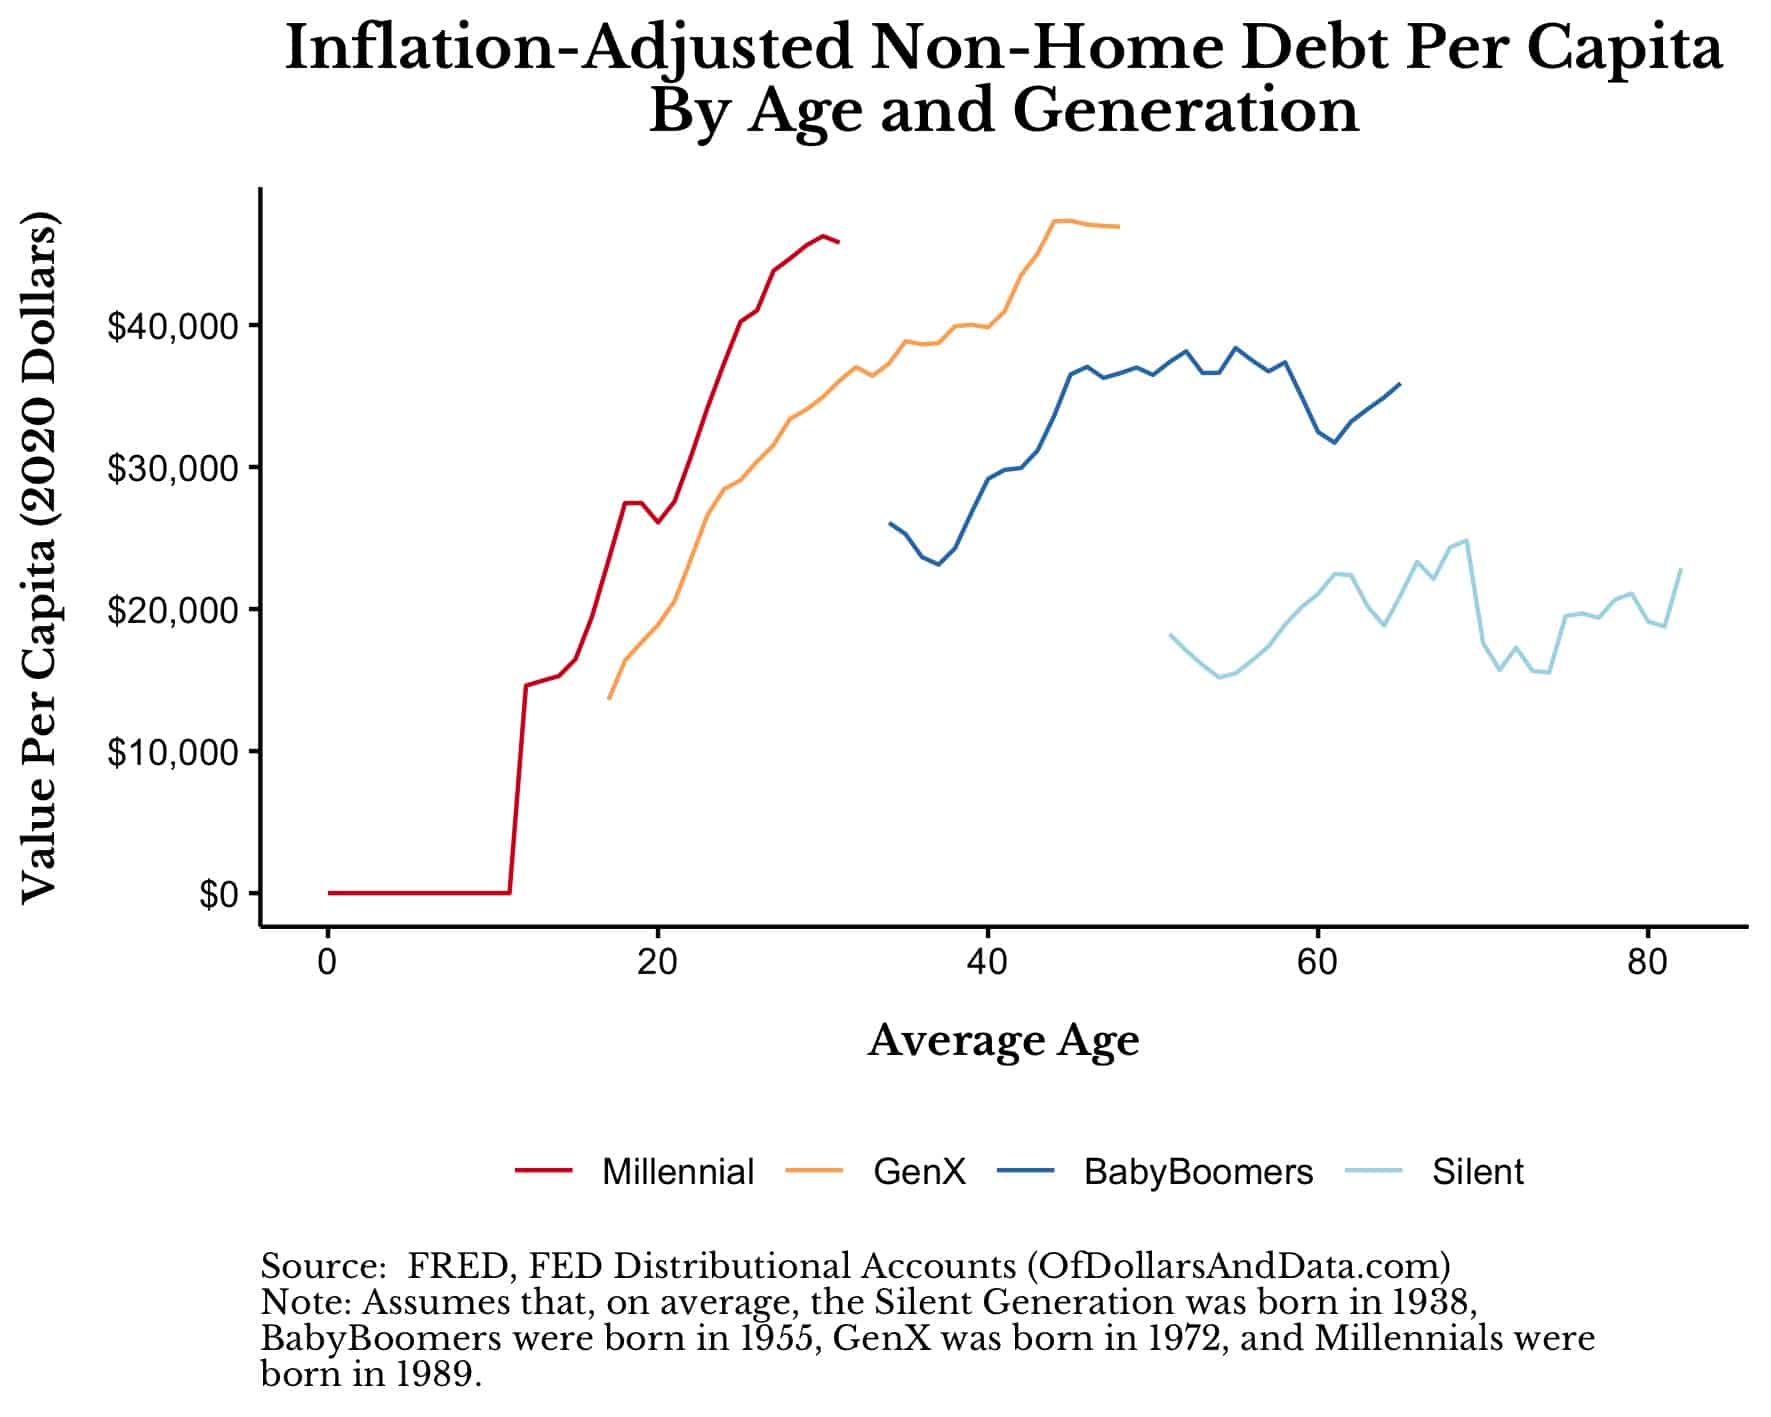 Inflation-adjusted non-home debt by year for households by age and generation